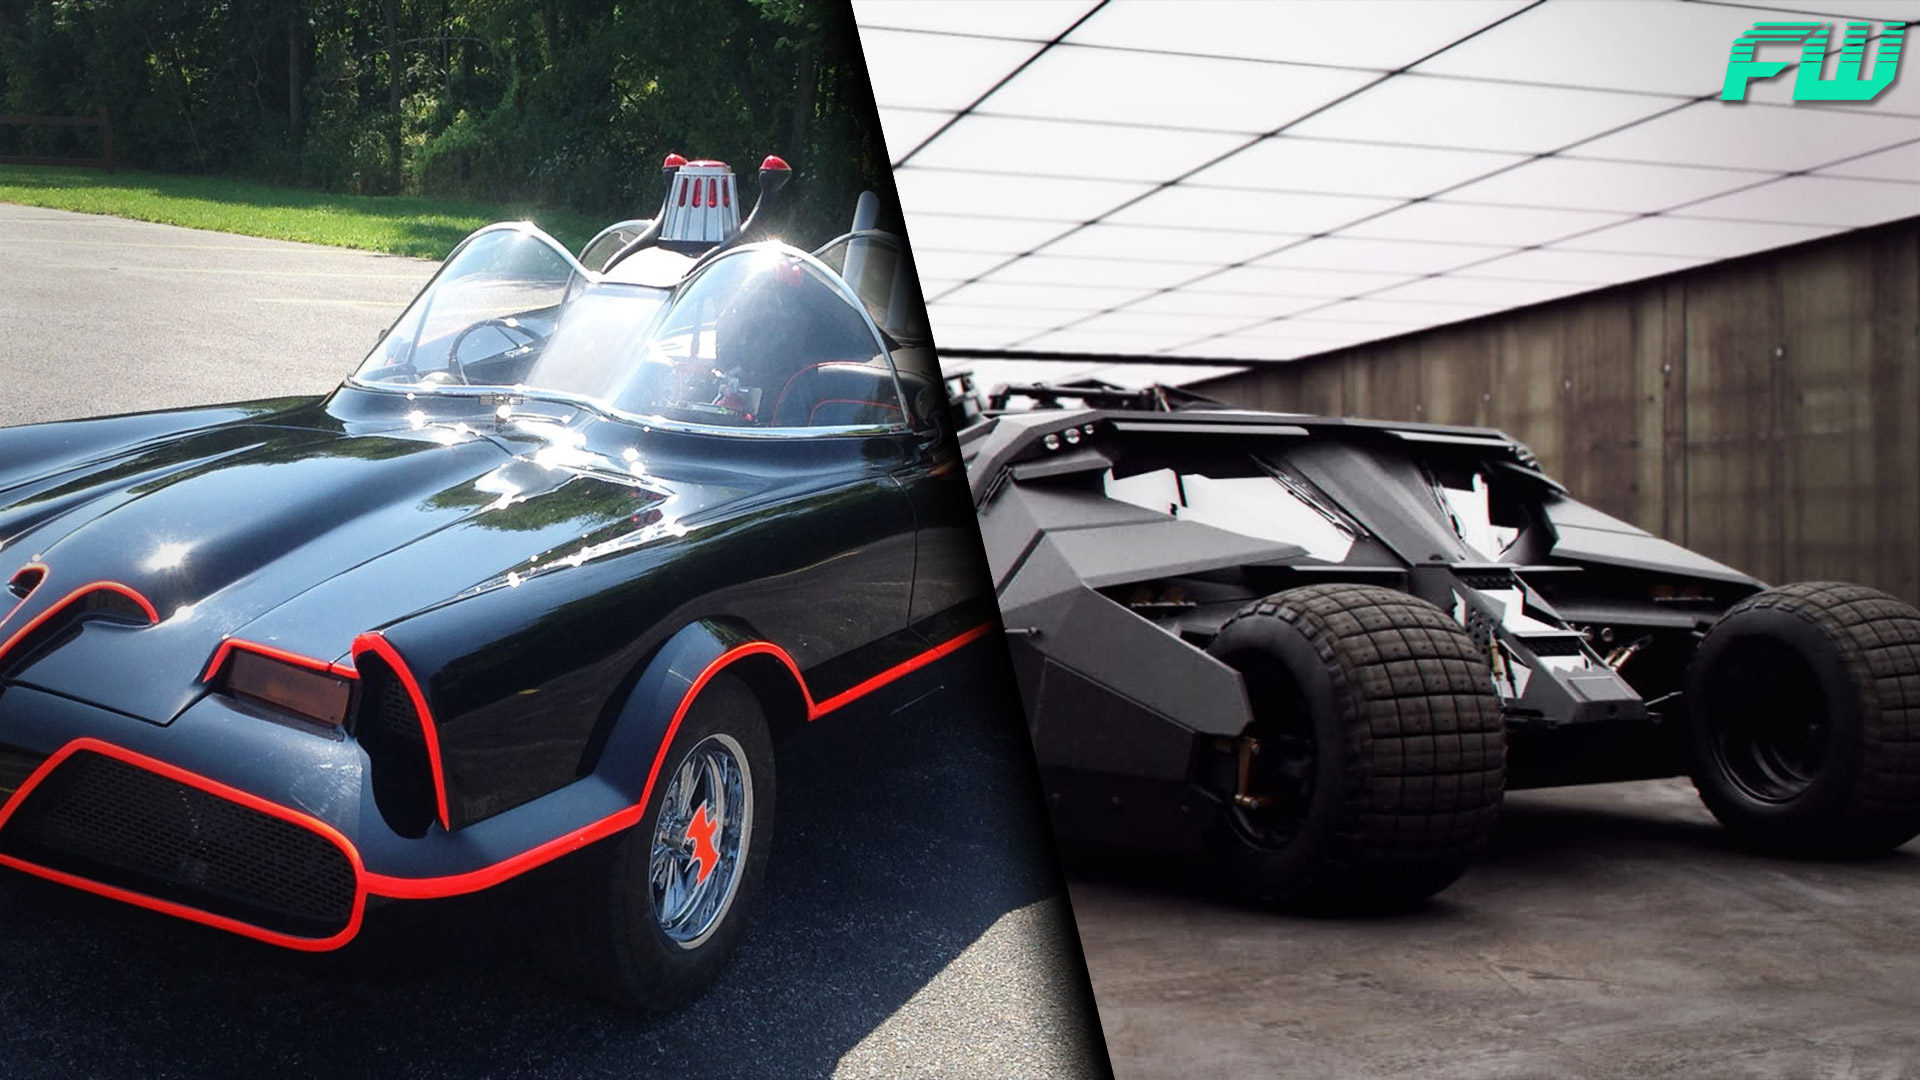 Every Theatrical Batmobile Ranked Worst to Best